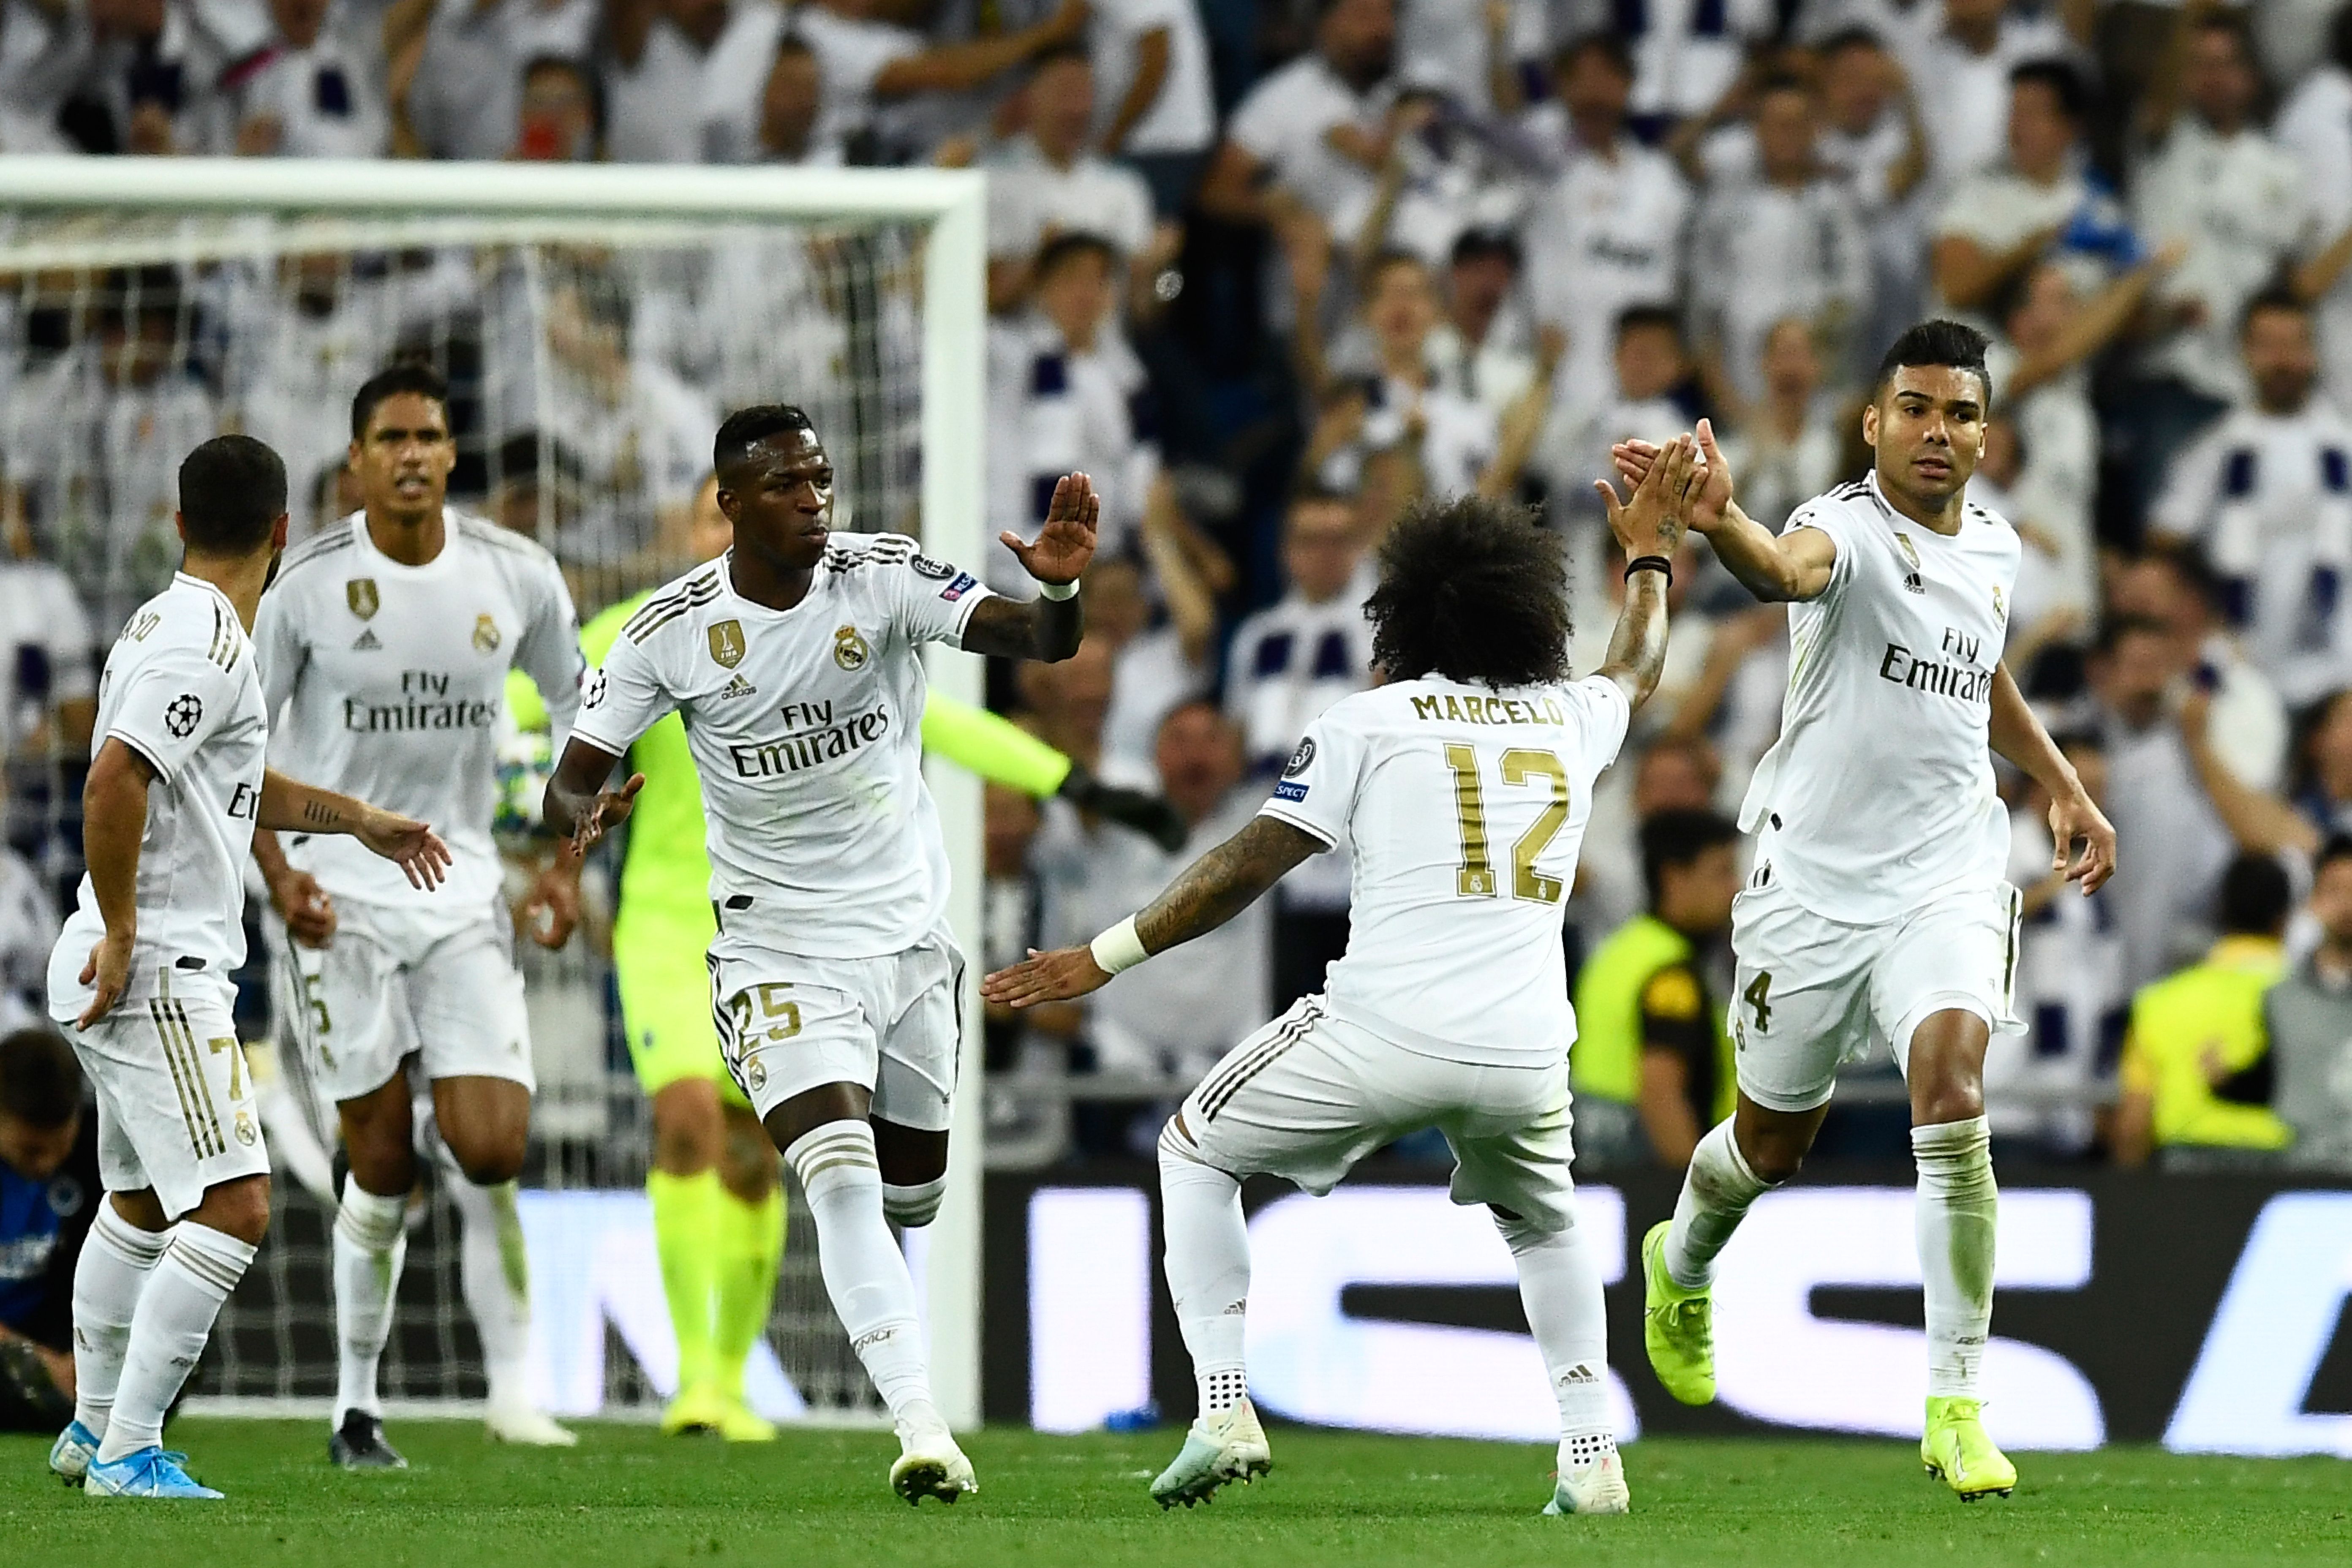 TOPSHOT - Real Madrid's Brazilian midfielder Casemiro (R) celebrates after scoring during the UEFA Champions league Group A football match between Real Madrid and Club Brugge at the Santiago Bernabeu stadium in Madrid on October 1, 2019. (Photo by OSCAR DEL POZO / AFP) (Photo by OSCAR DEL POZO/AFP via Getty Images)